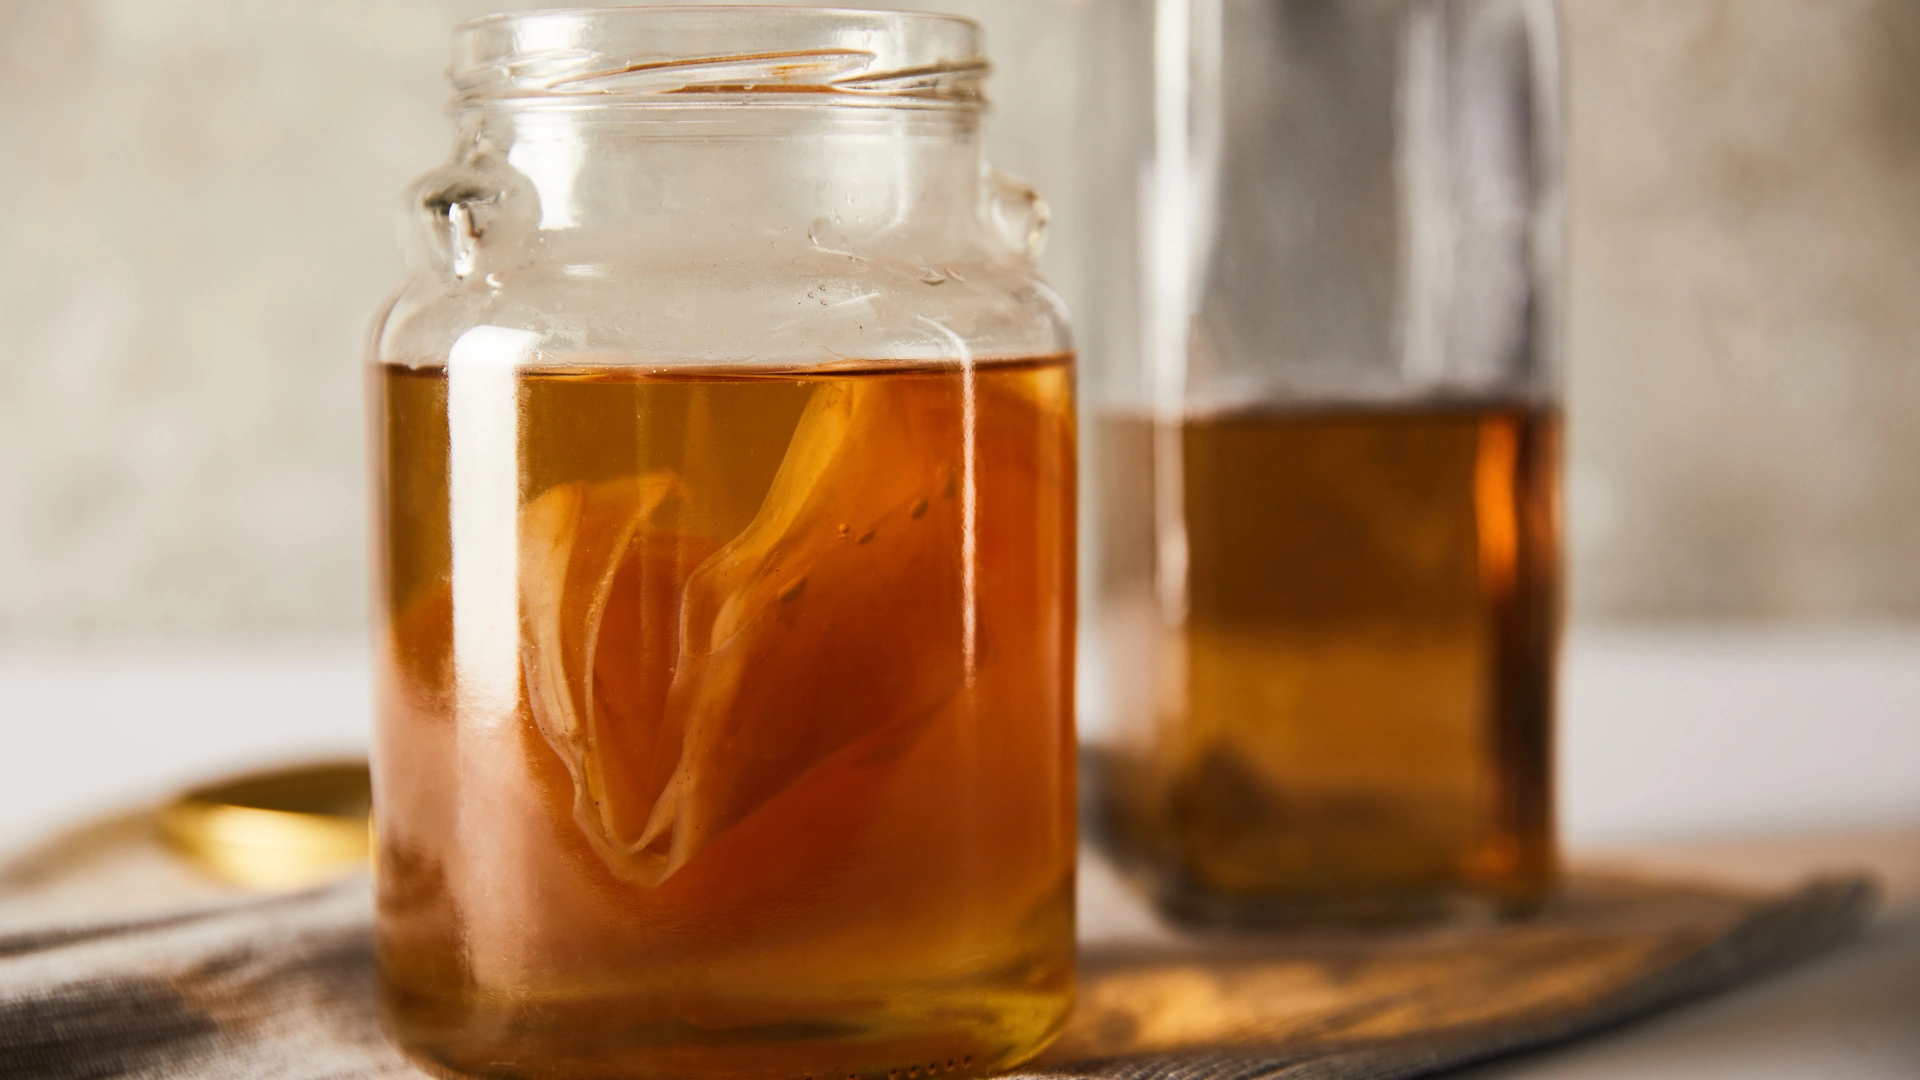 In this session of culinary classes at Heenat Salma, we will learn the art of making Kombucha